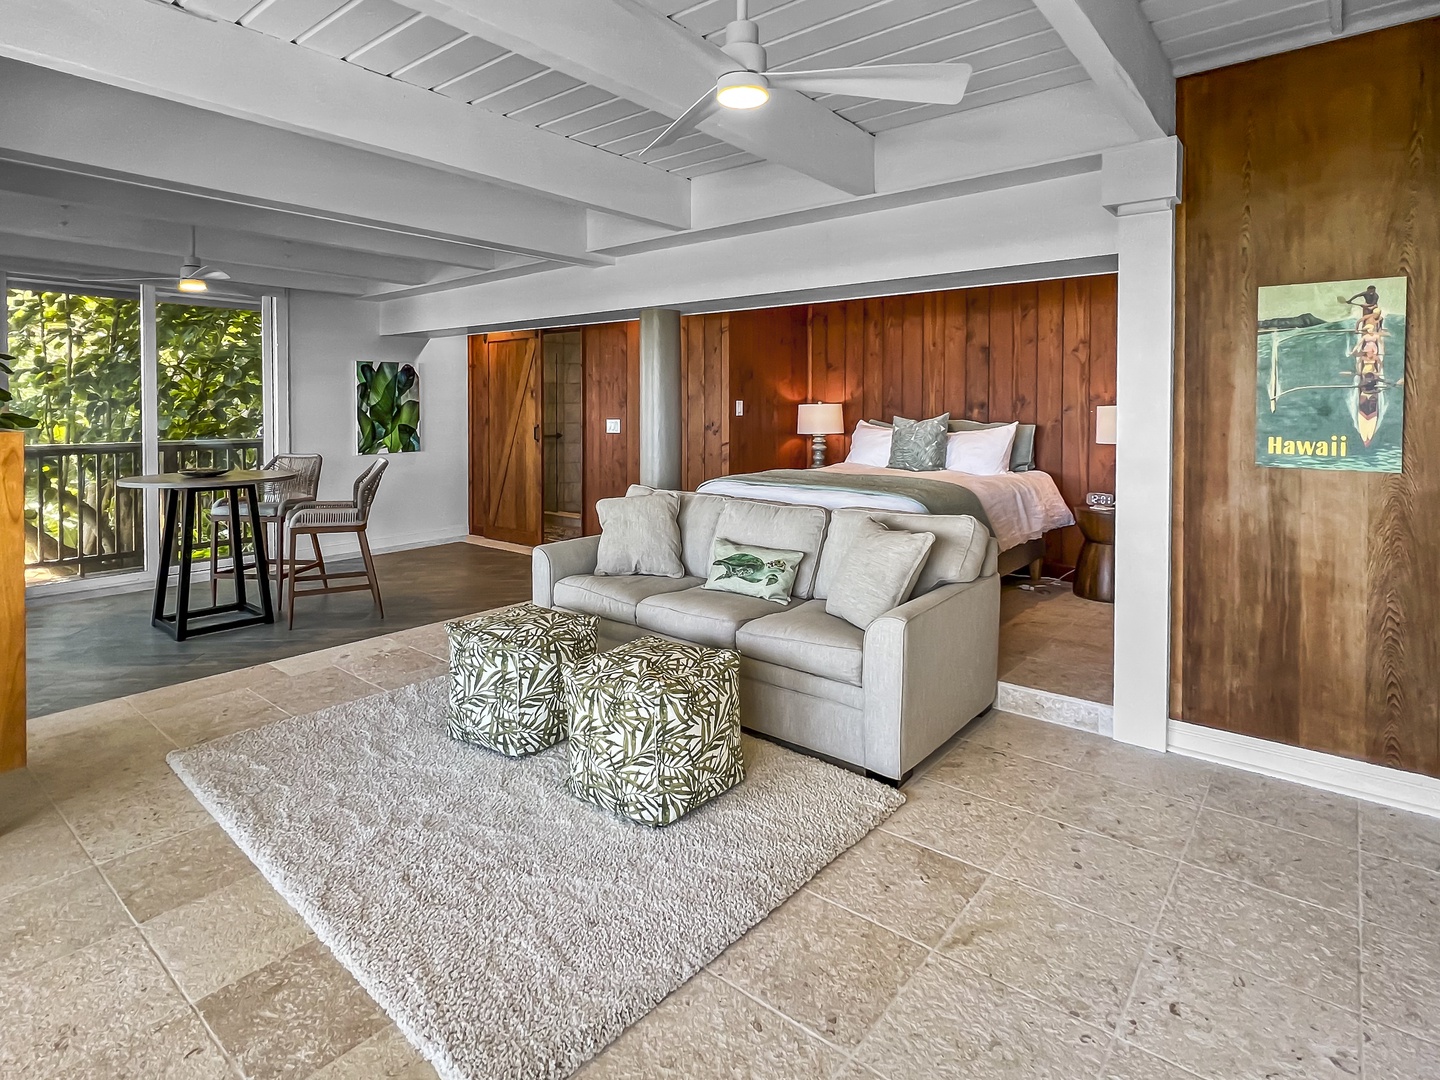 Kailua Vacation Rentals, Hale Lani - Extra large guest bedroom with queen and pull out sofa.